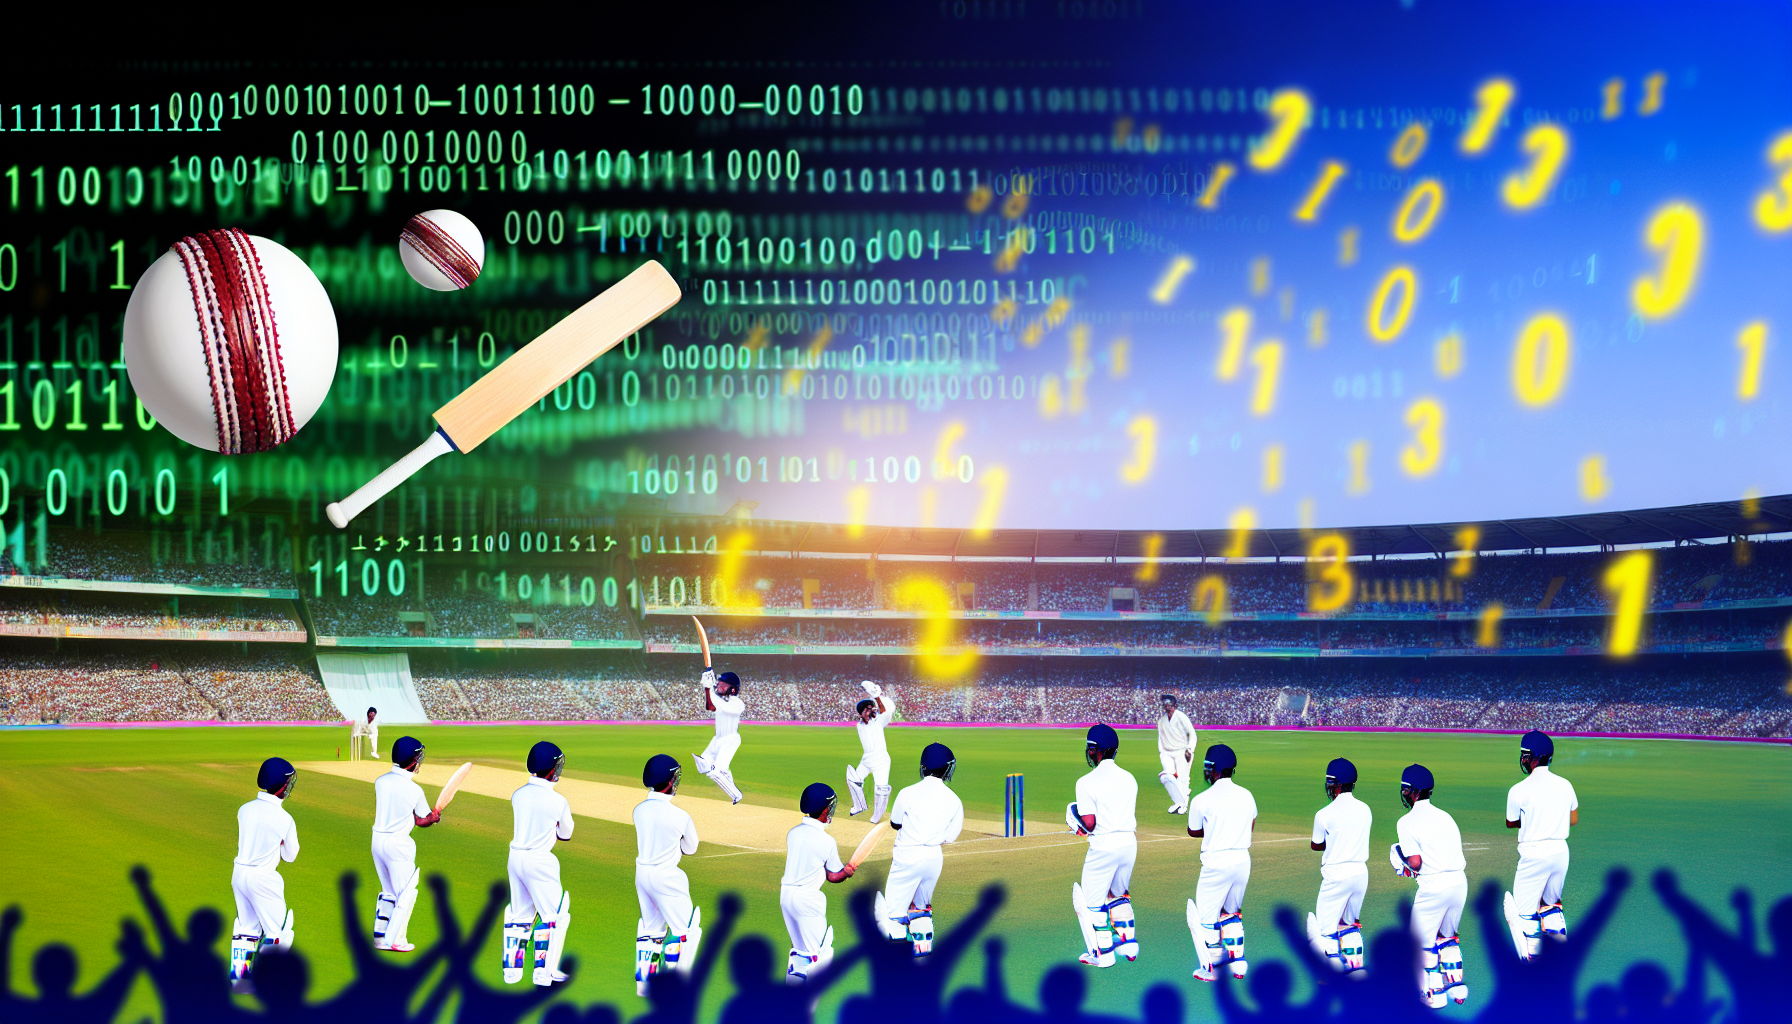 A cricket match with coding elements overlaid, symbolizing the fusion of cricket and coding